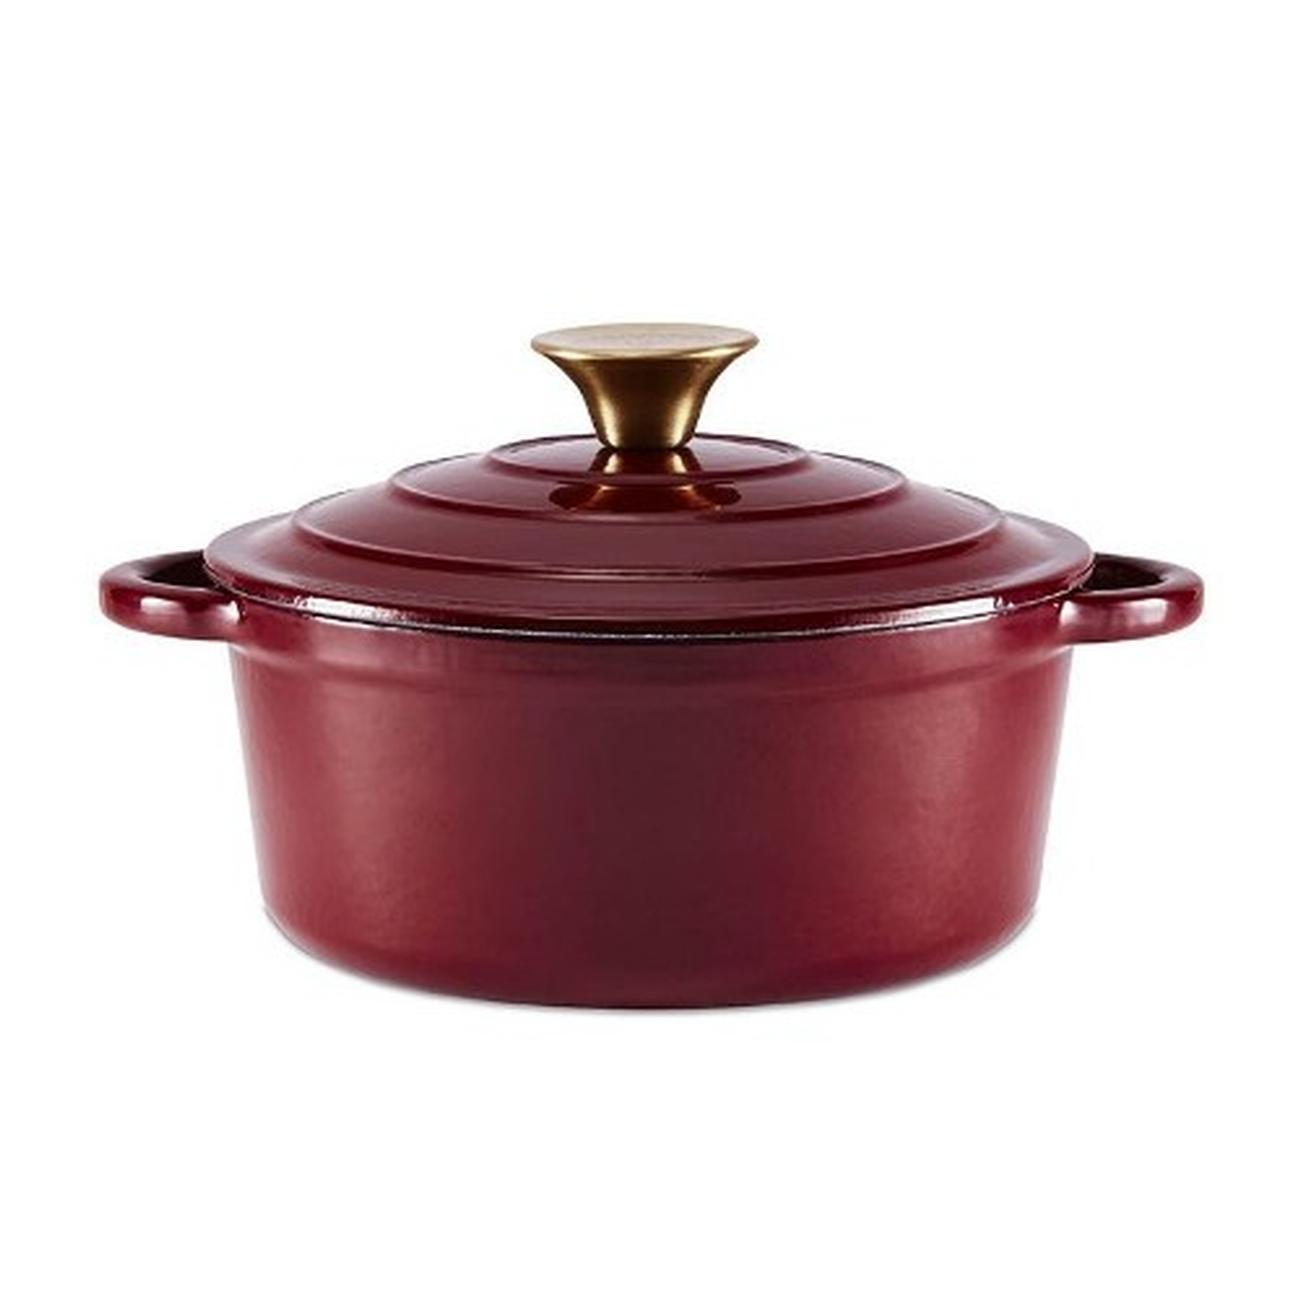 barbary-oak-foundry-casserole-20cm-round-red-cast-iron - Barbary & Oak Foundry 20cm Round Cast Iron Casserole-Bordeaux Red